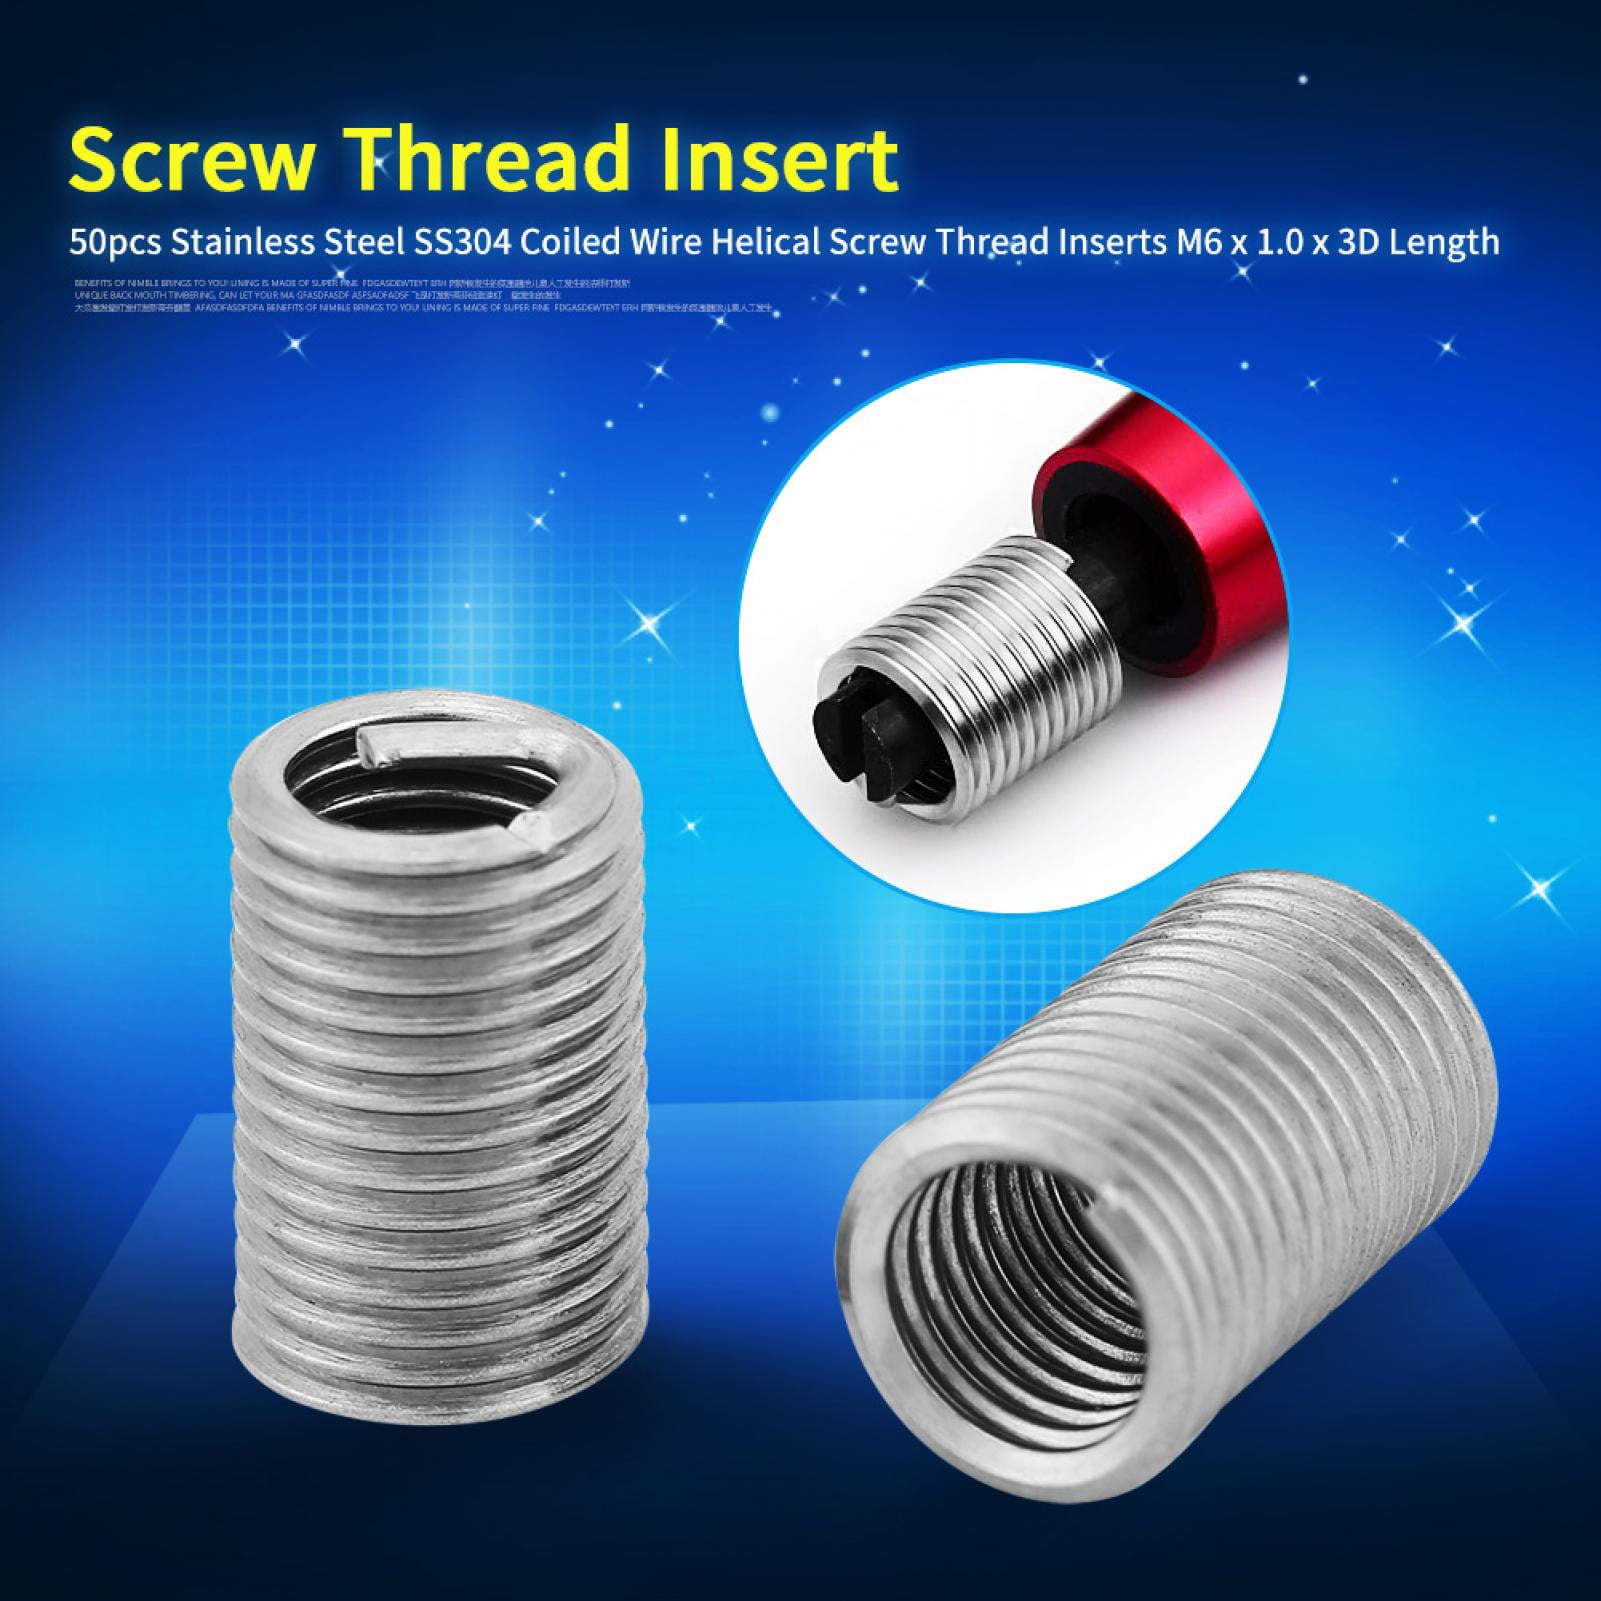 50Pcs Stainless Steel SS304 Coiled Wire Helical Screw Threaded Inserts Set for Aluminum,Magnesium Thread Repair Inserts Assortment Kits M6 x 1.0 x 3D Length 